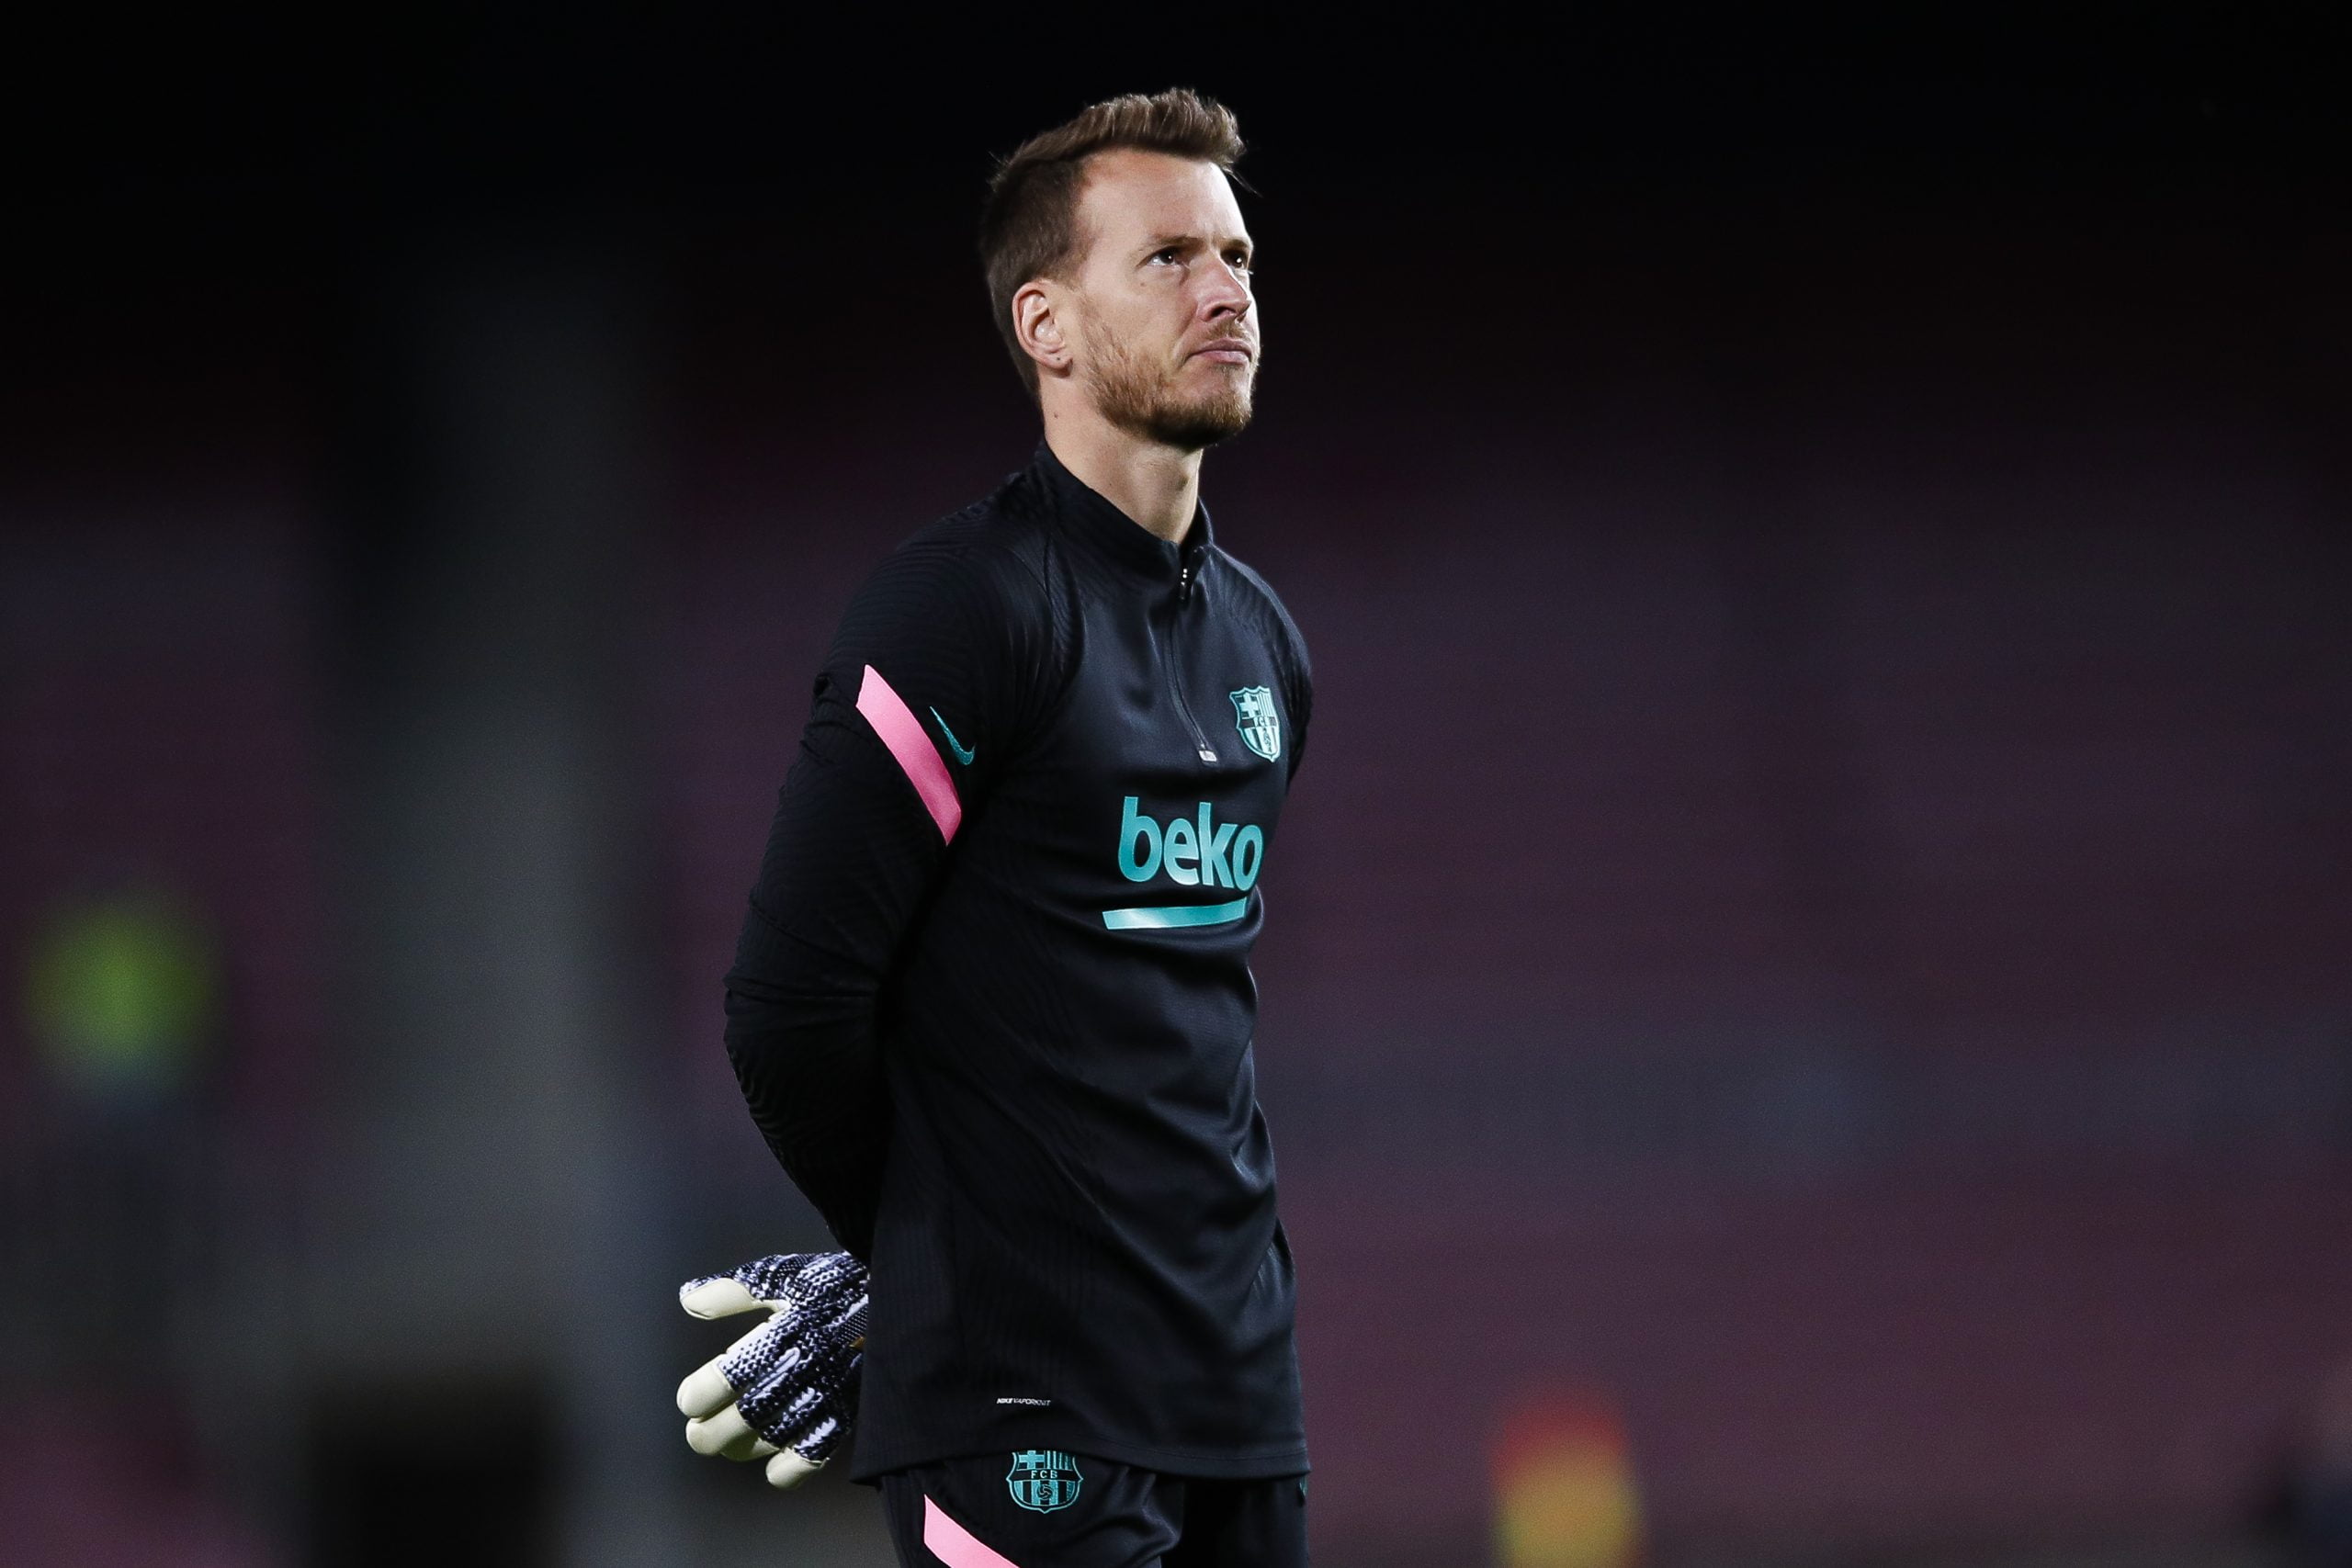 Barcelona set €15m asking price for Neto who is seen in the photo